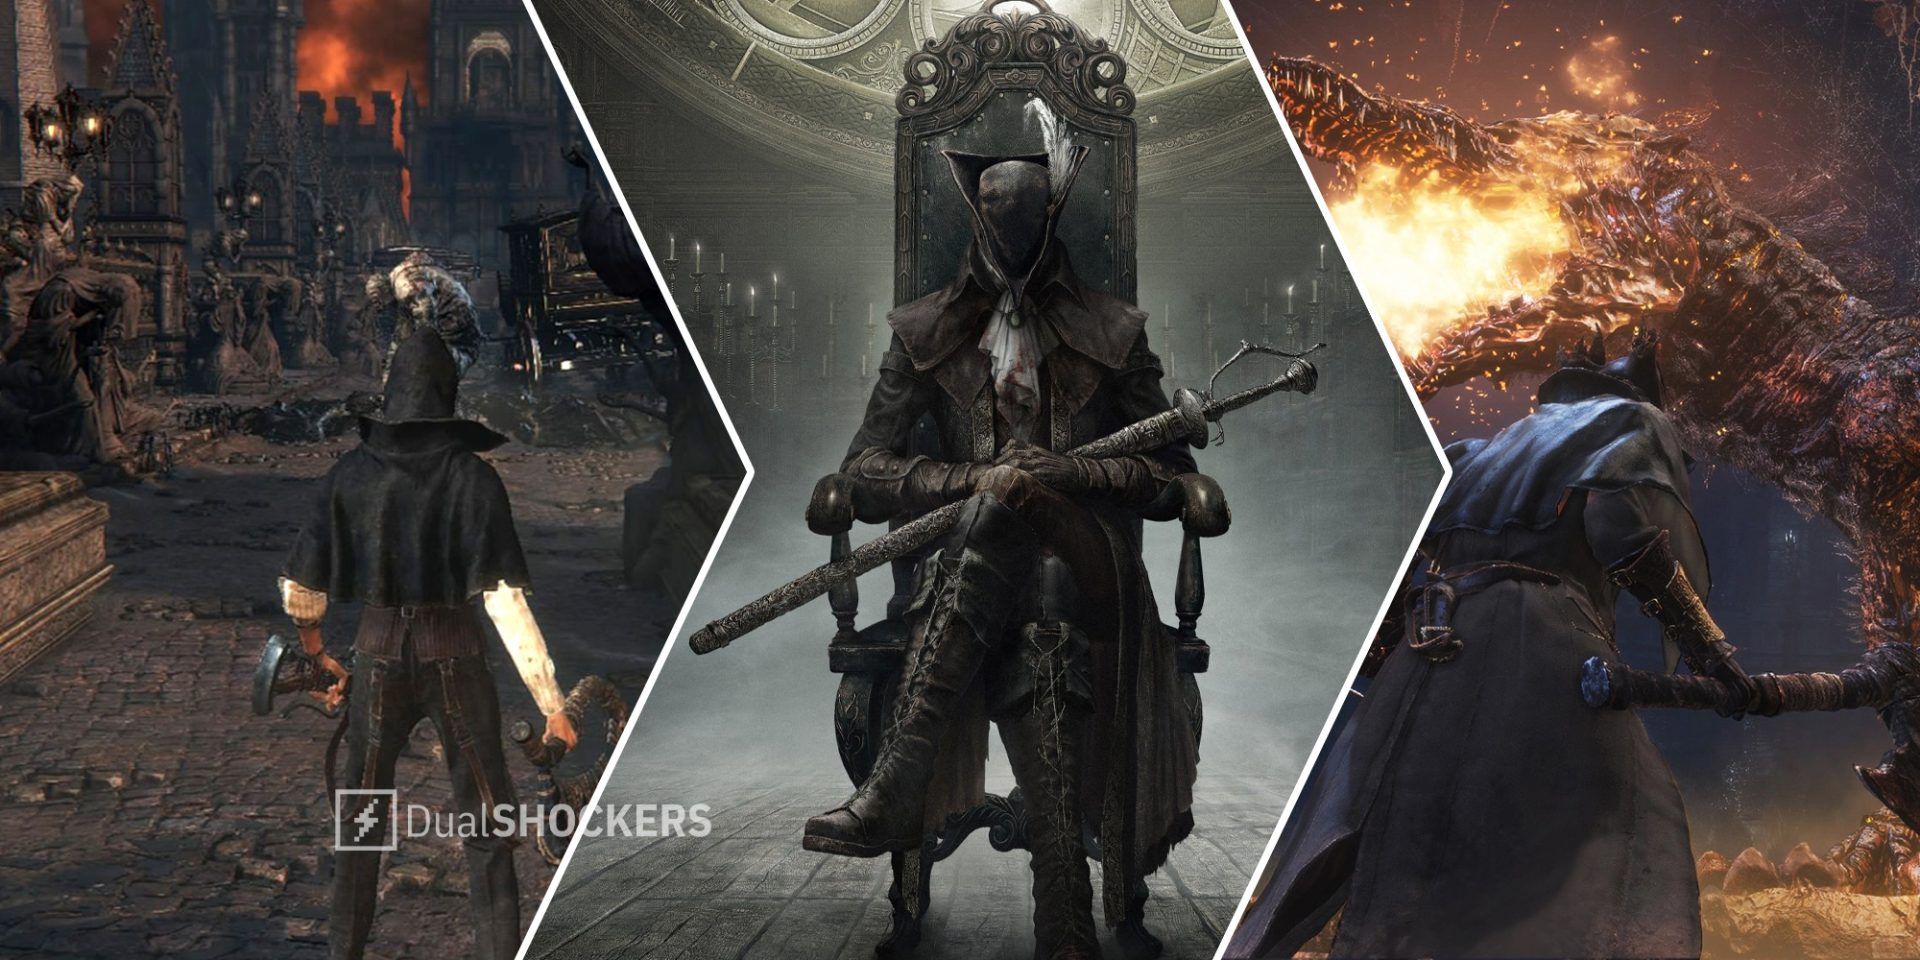 Bloodborne player on left, Bloodborne promo image in middle, player facing a boss on right